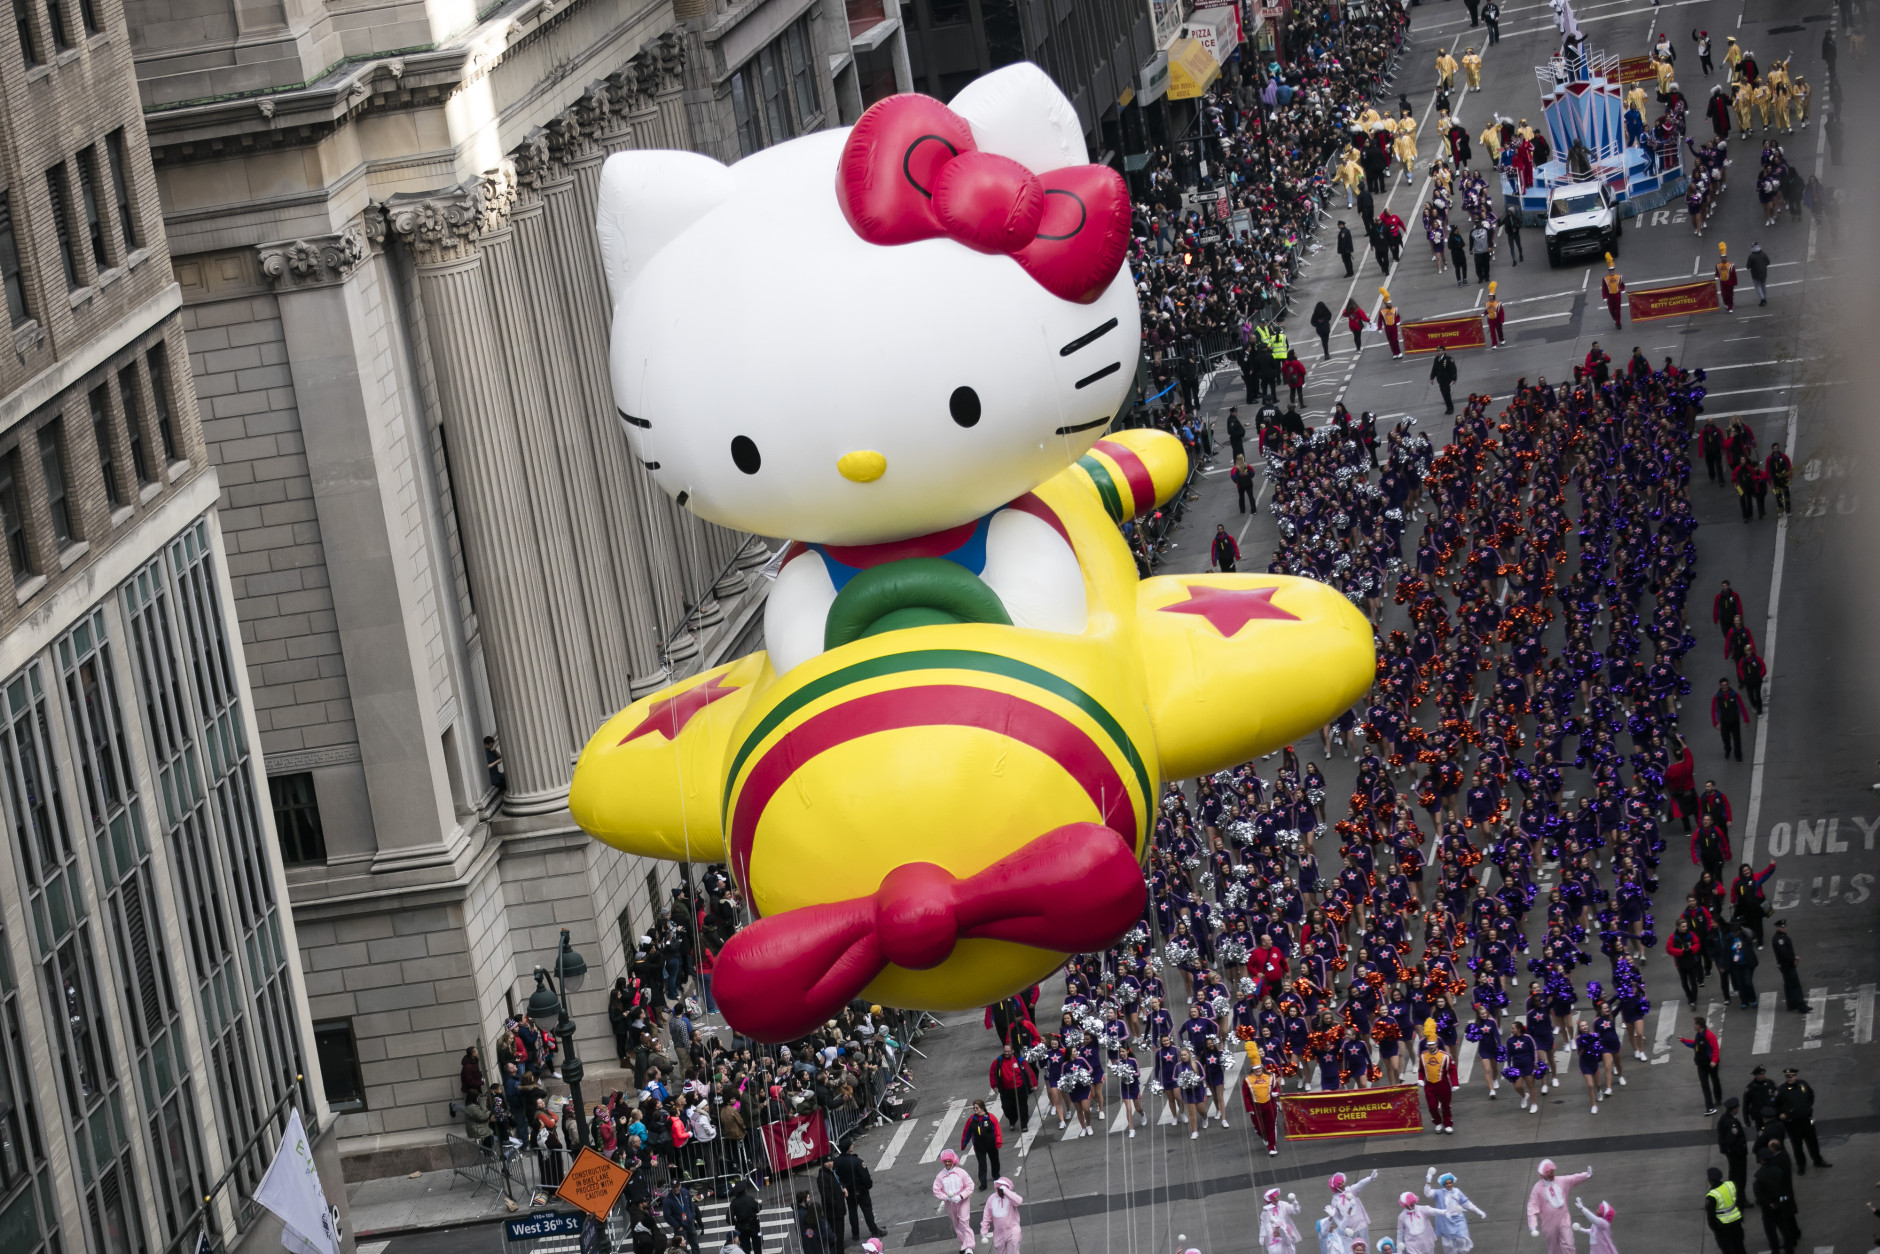 A Hello Kitty float goes down 6th Avenue for the 89th annual Macy's Thanksgiving Day Parade as seen from above street level on Thursday, Nov. 26, 2015, in New York. (Photo by Ben Hider/Invision/AP)